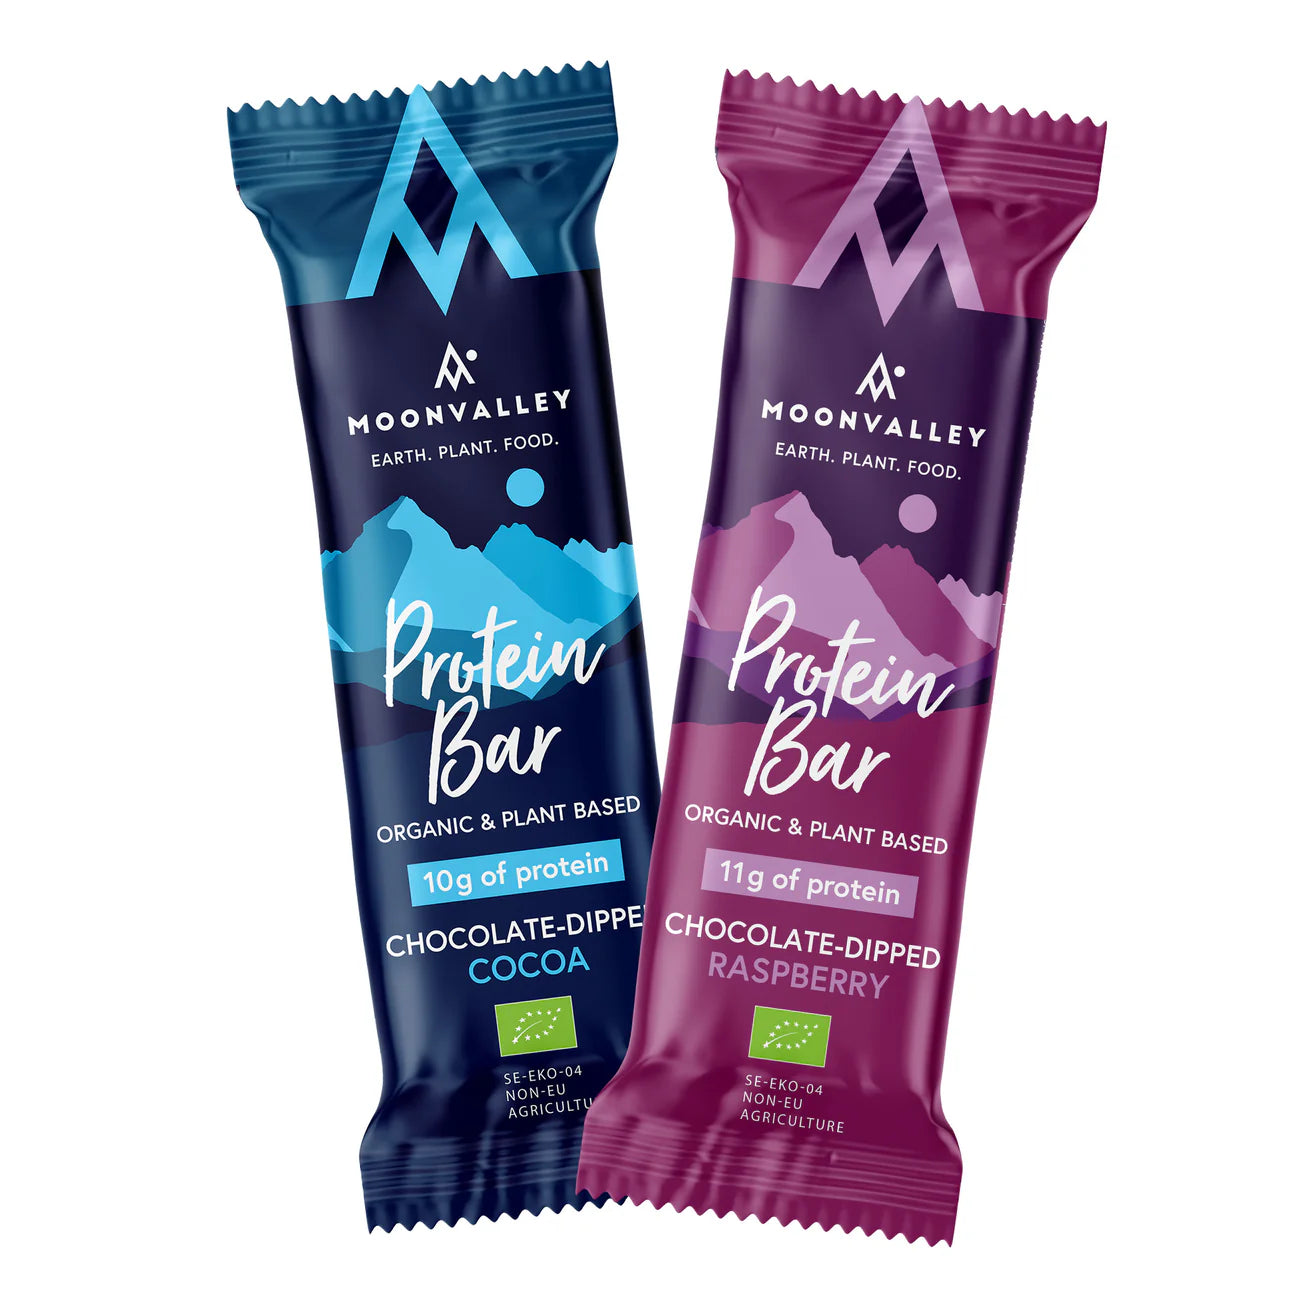 Moonvalley Organic Protein Bar - Chocolate-Dipped - Mix Box of 18 servings